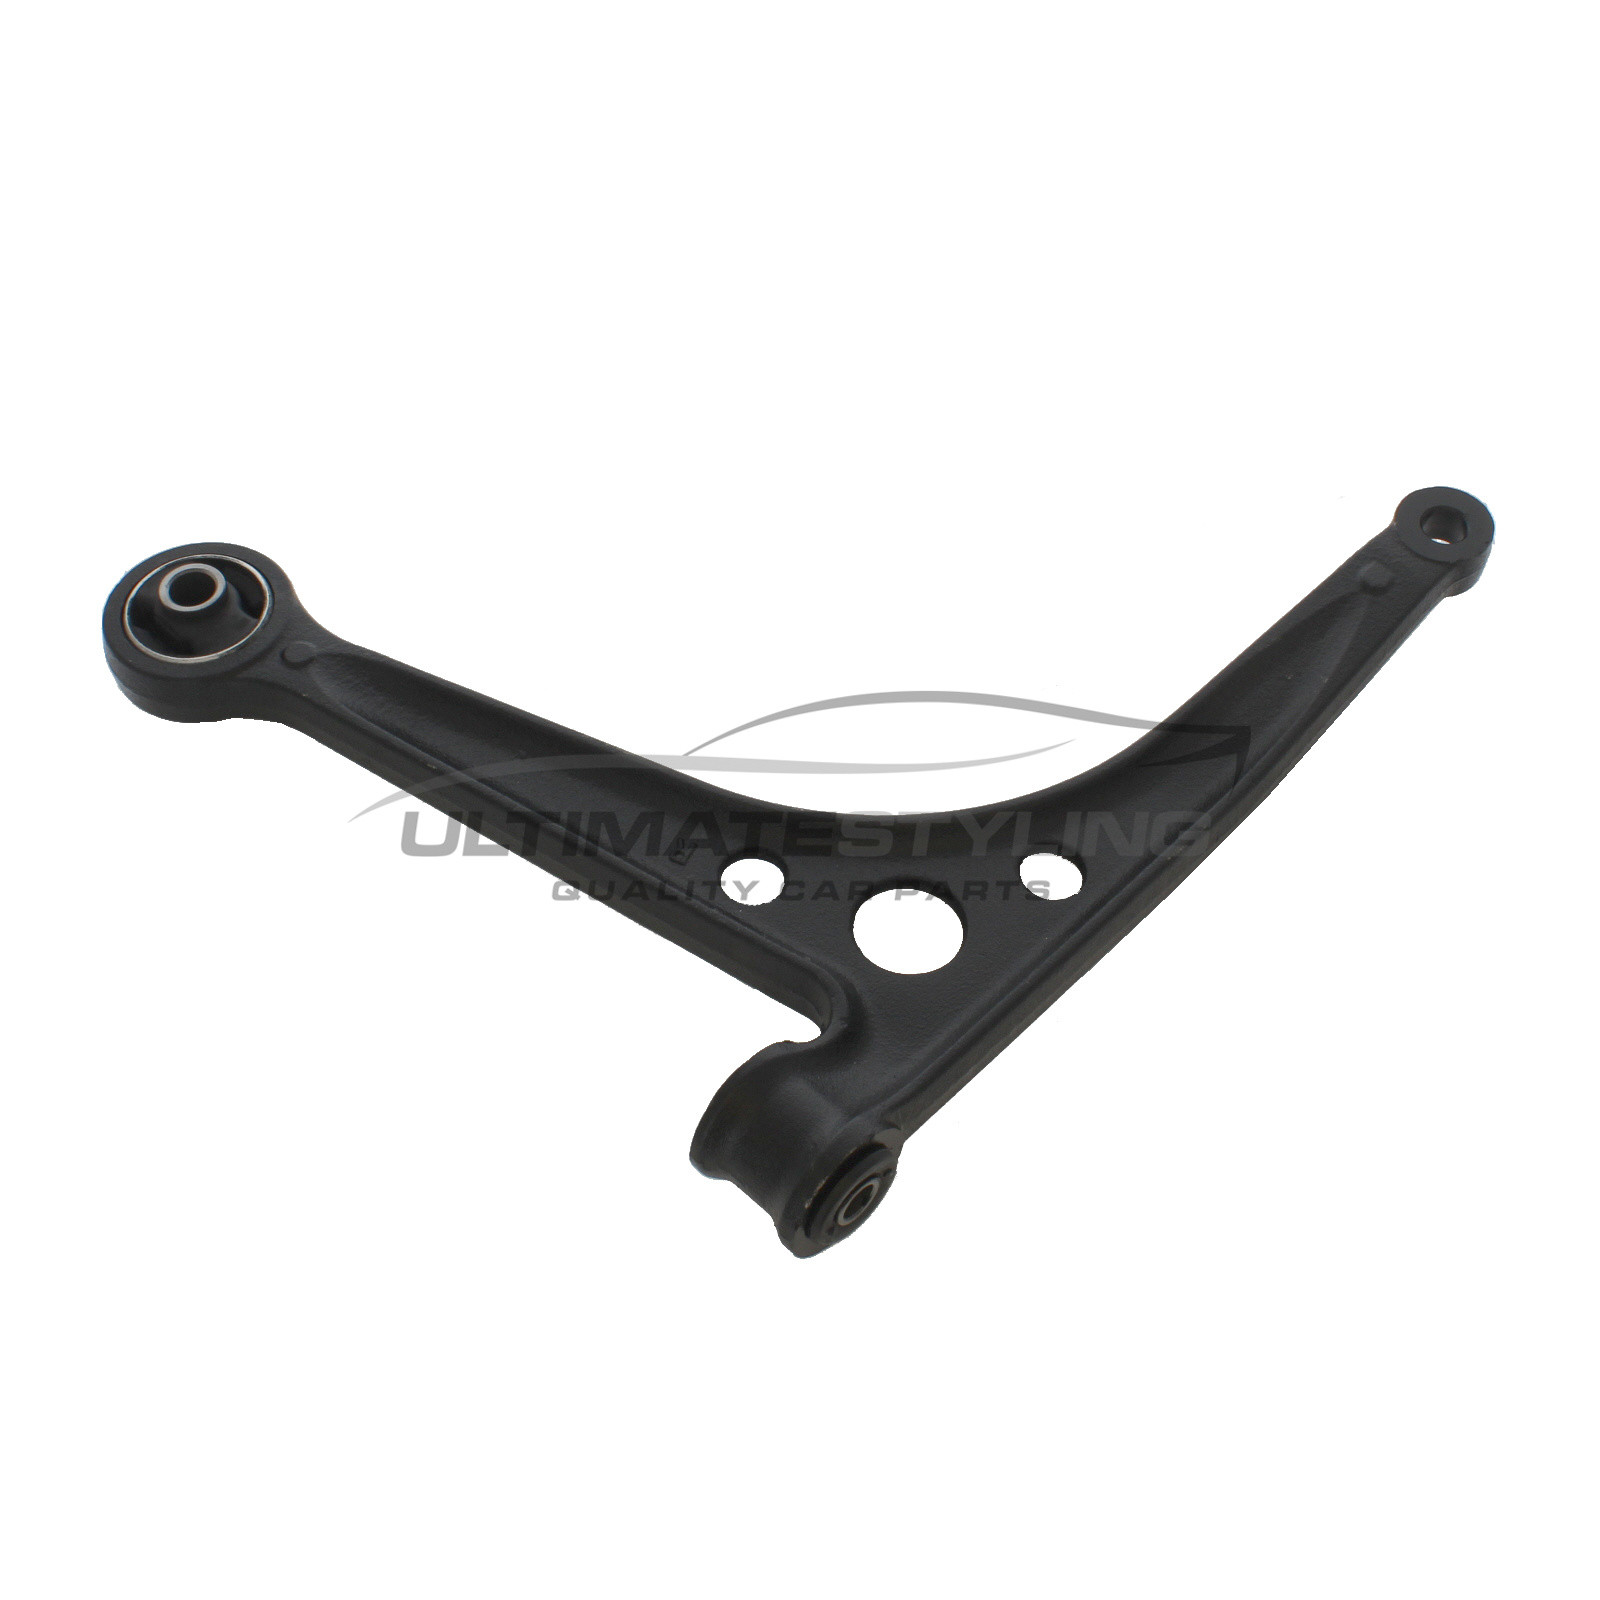 Ford Galaxy 1995-2006, Seat Alhambra 1996-2011, VW Sharan 1995-2011 Front Lower Suspension Arm (Cast Iron) Excluding Ball Joint and Rear Bush Driver Side (RH)